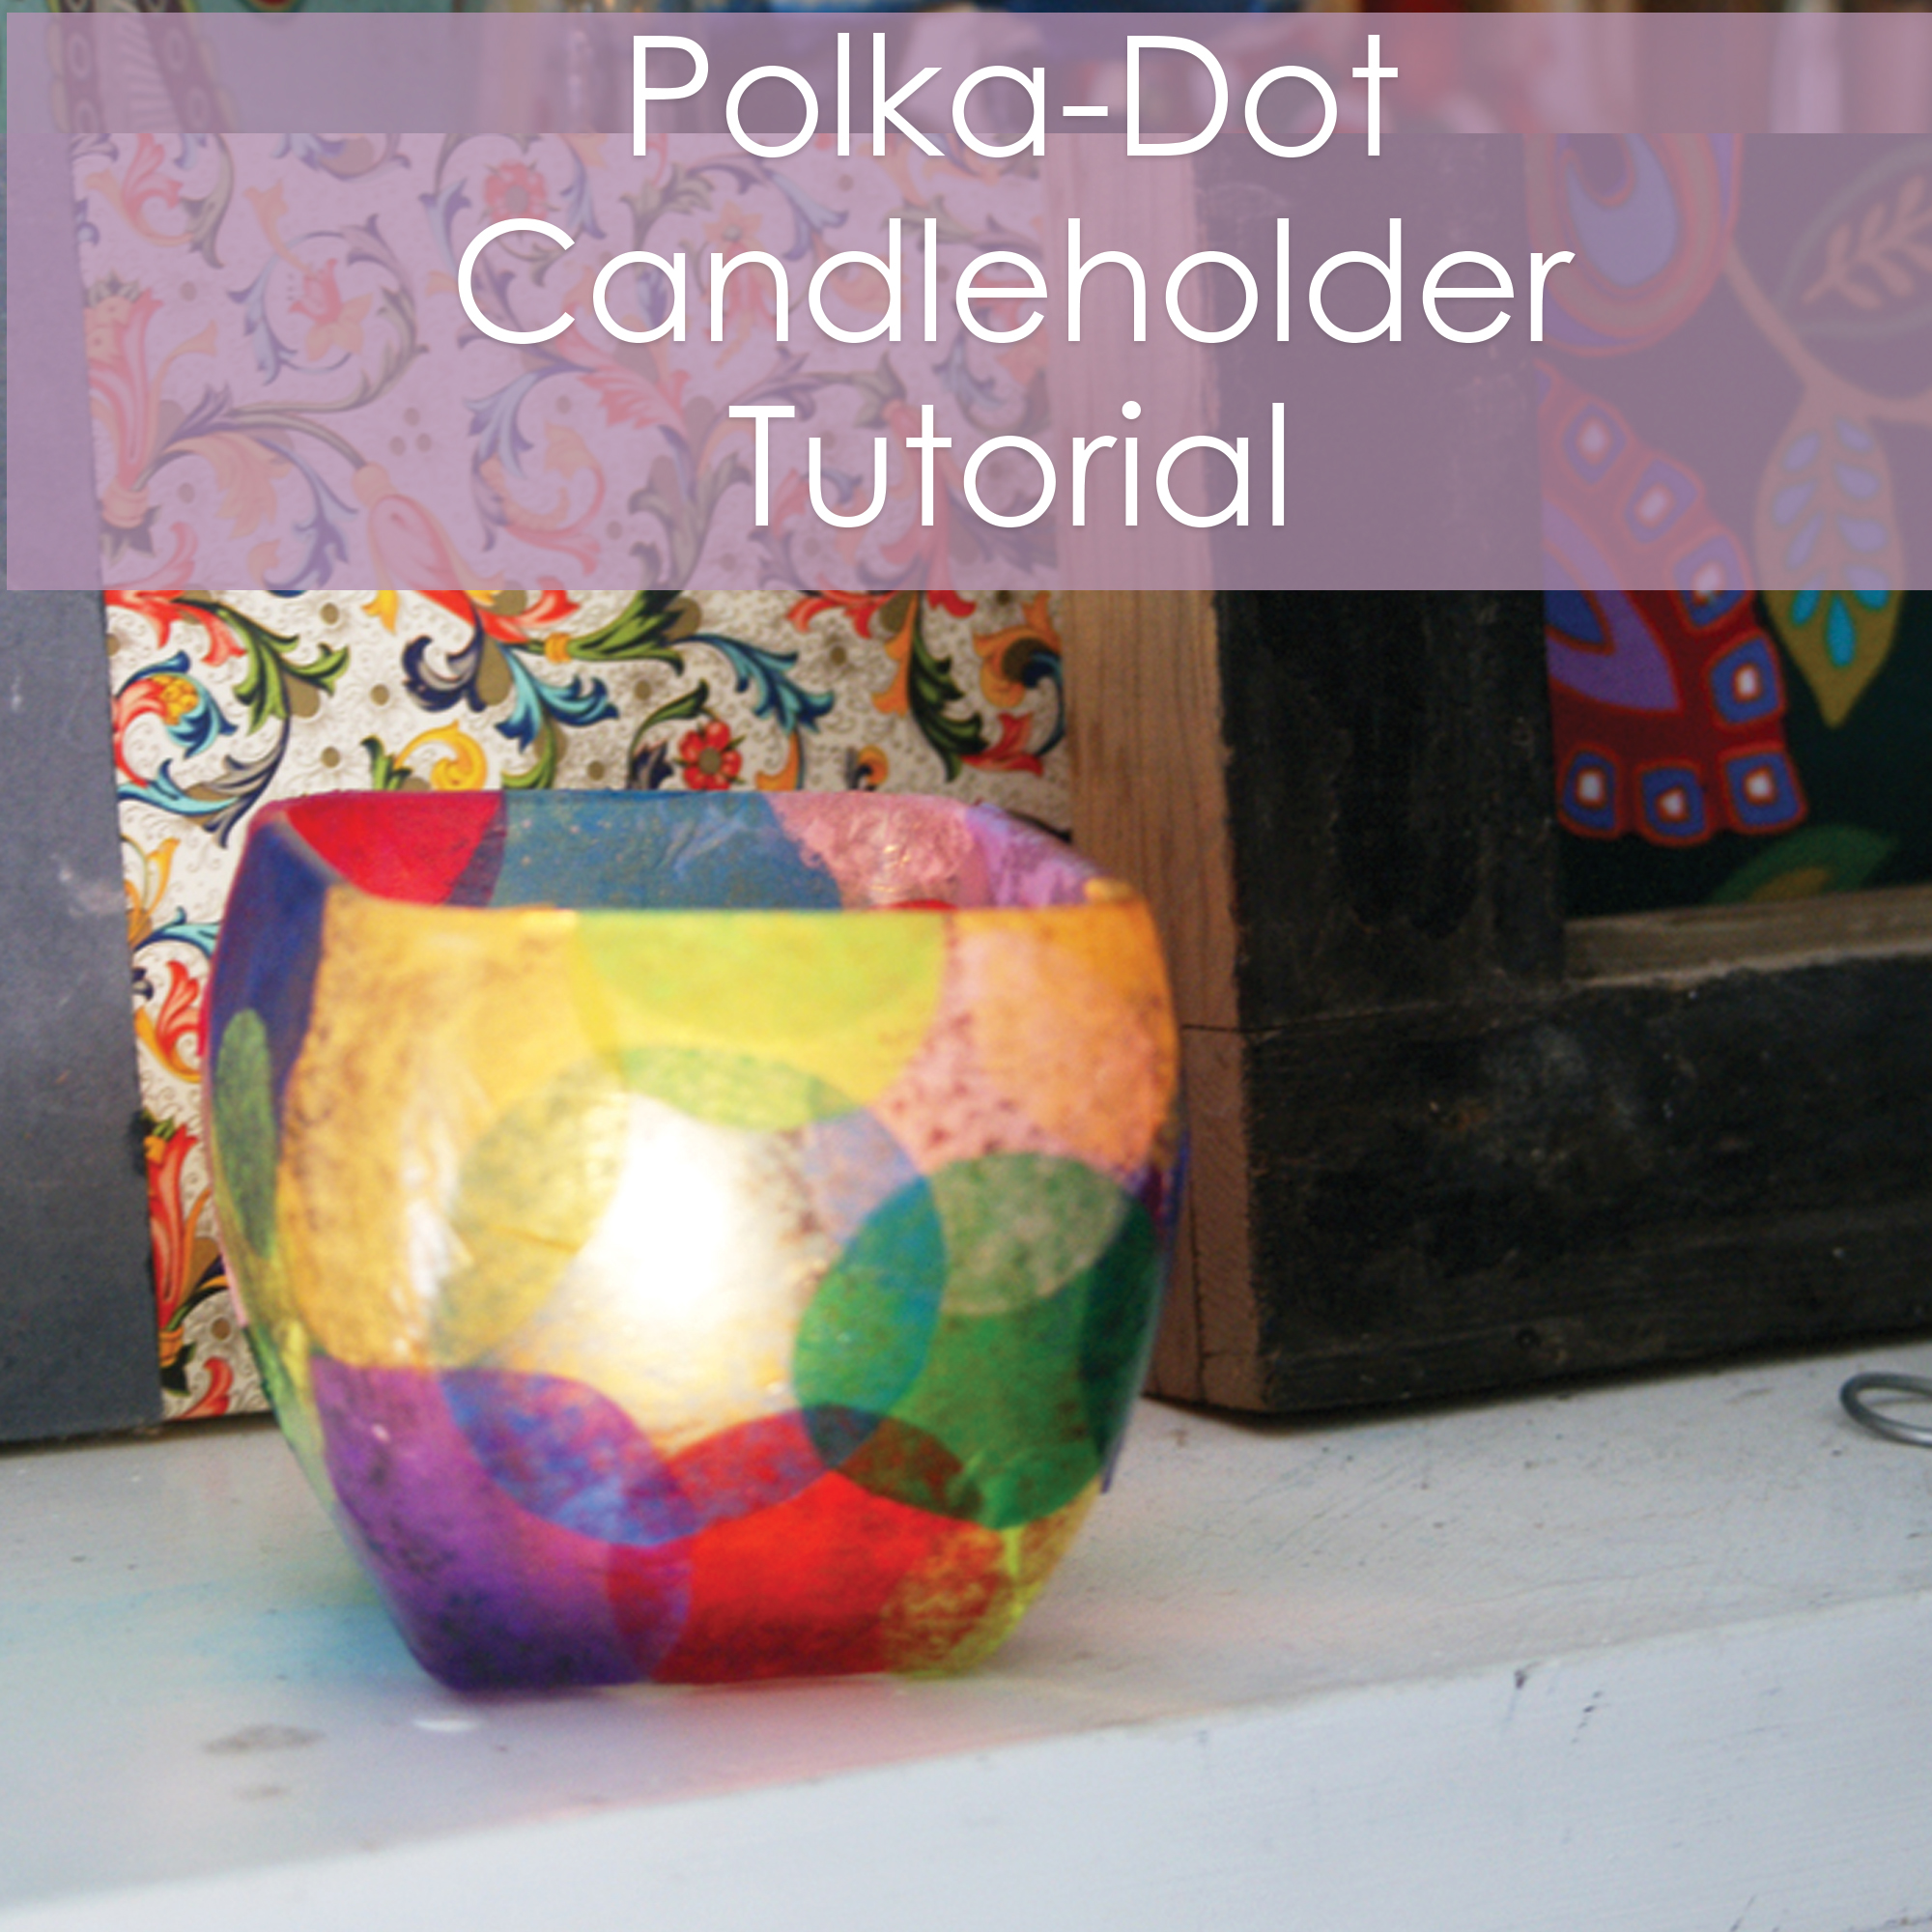 Polka-Dot Candleholder Tutorial - a post from Muse of the Morning